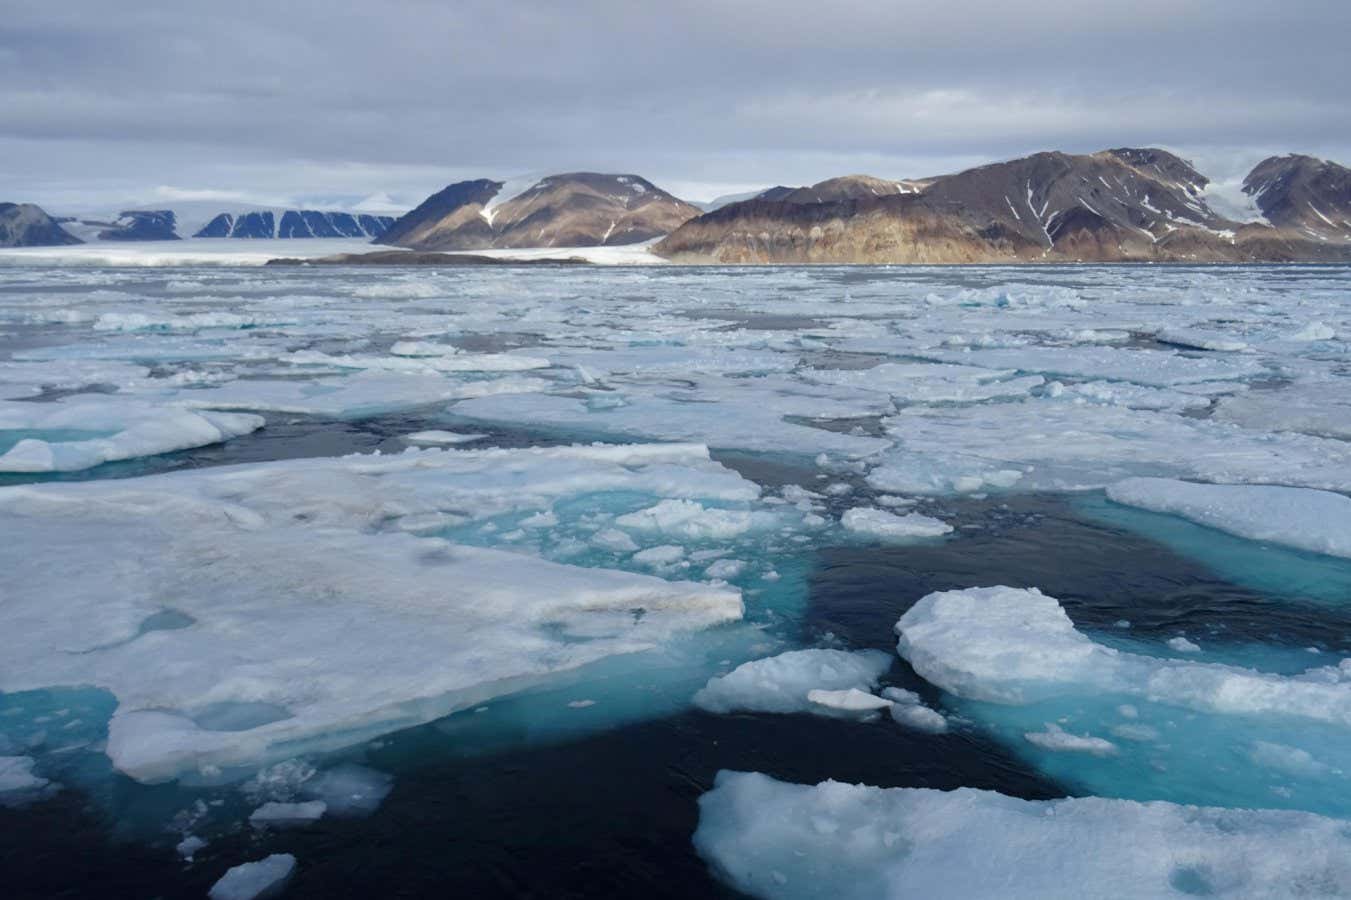 Melting sea ice is hindering, not helping, Canadian Arctic shipping